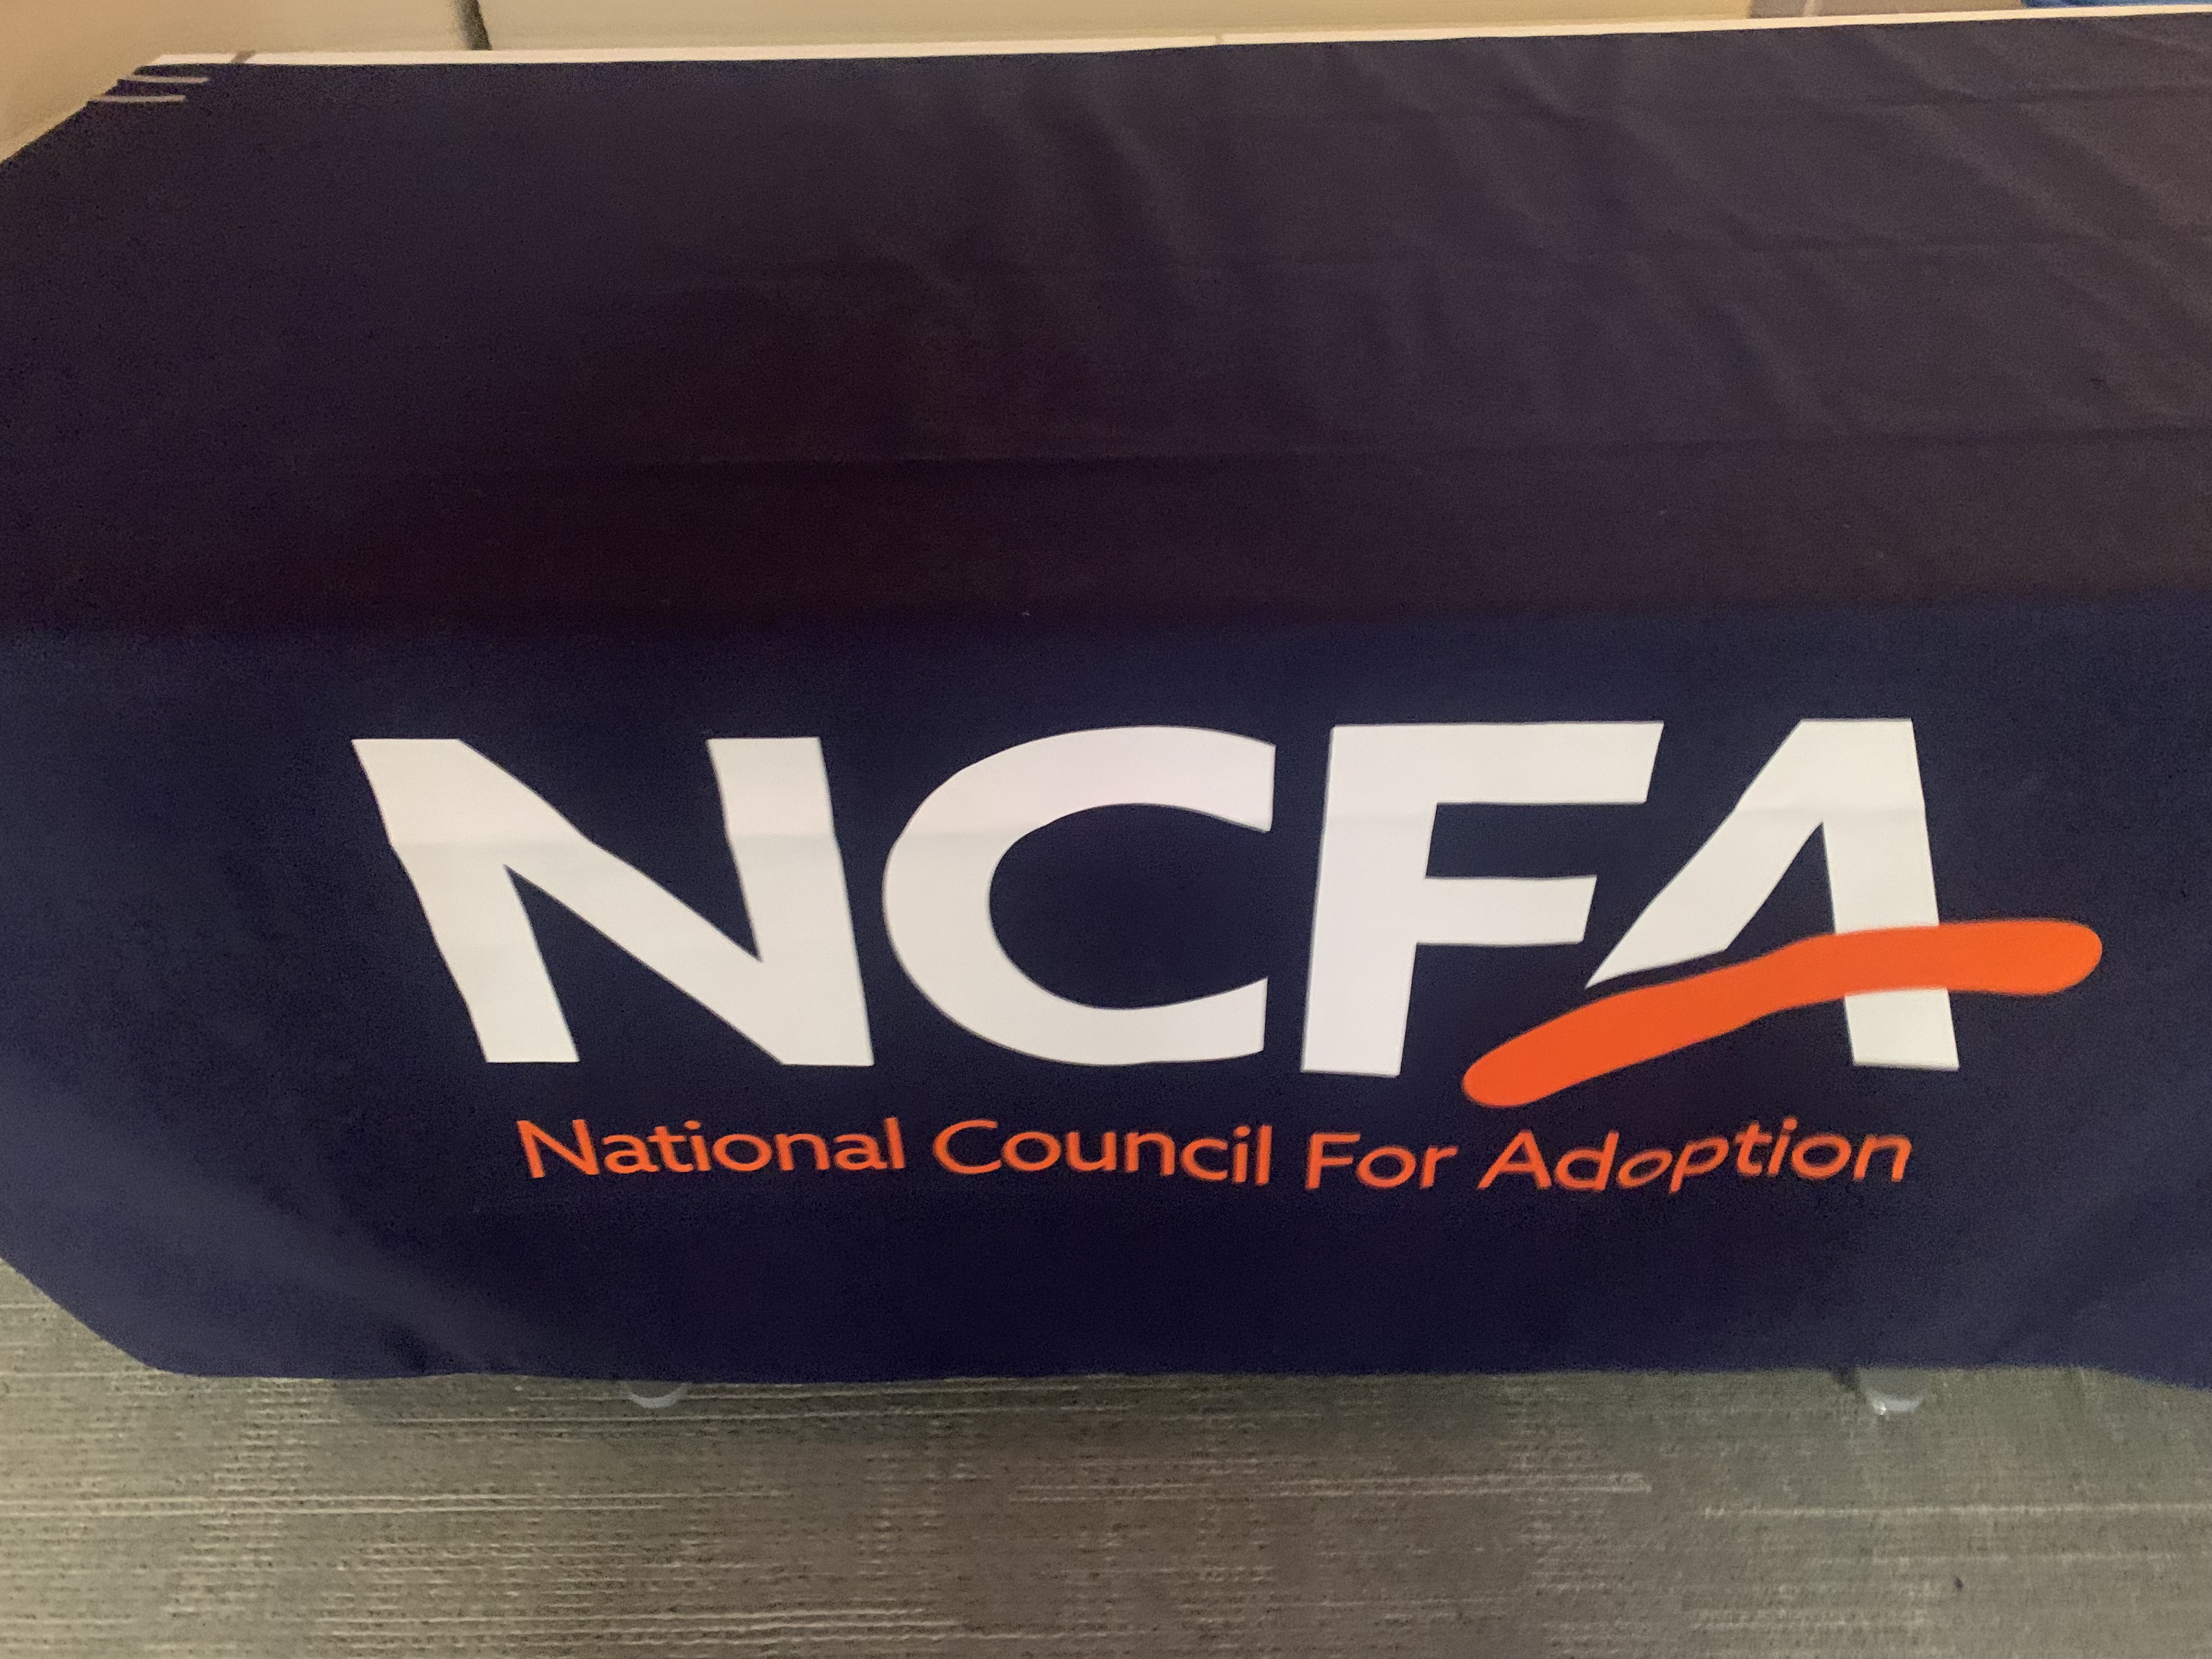 Table outside the National Council for Adoption's Hall of Fame awards on Nov. 2, 2021 in Washington, D.C.